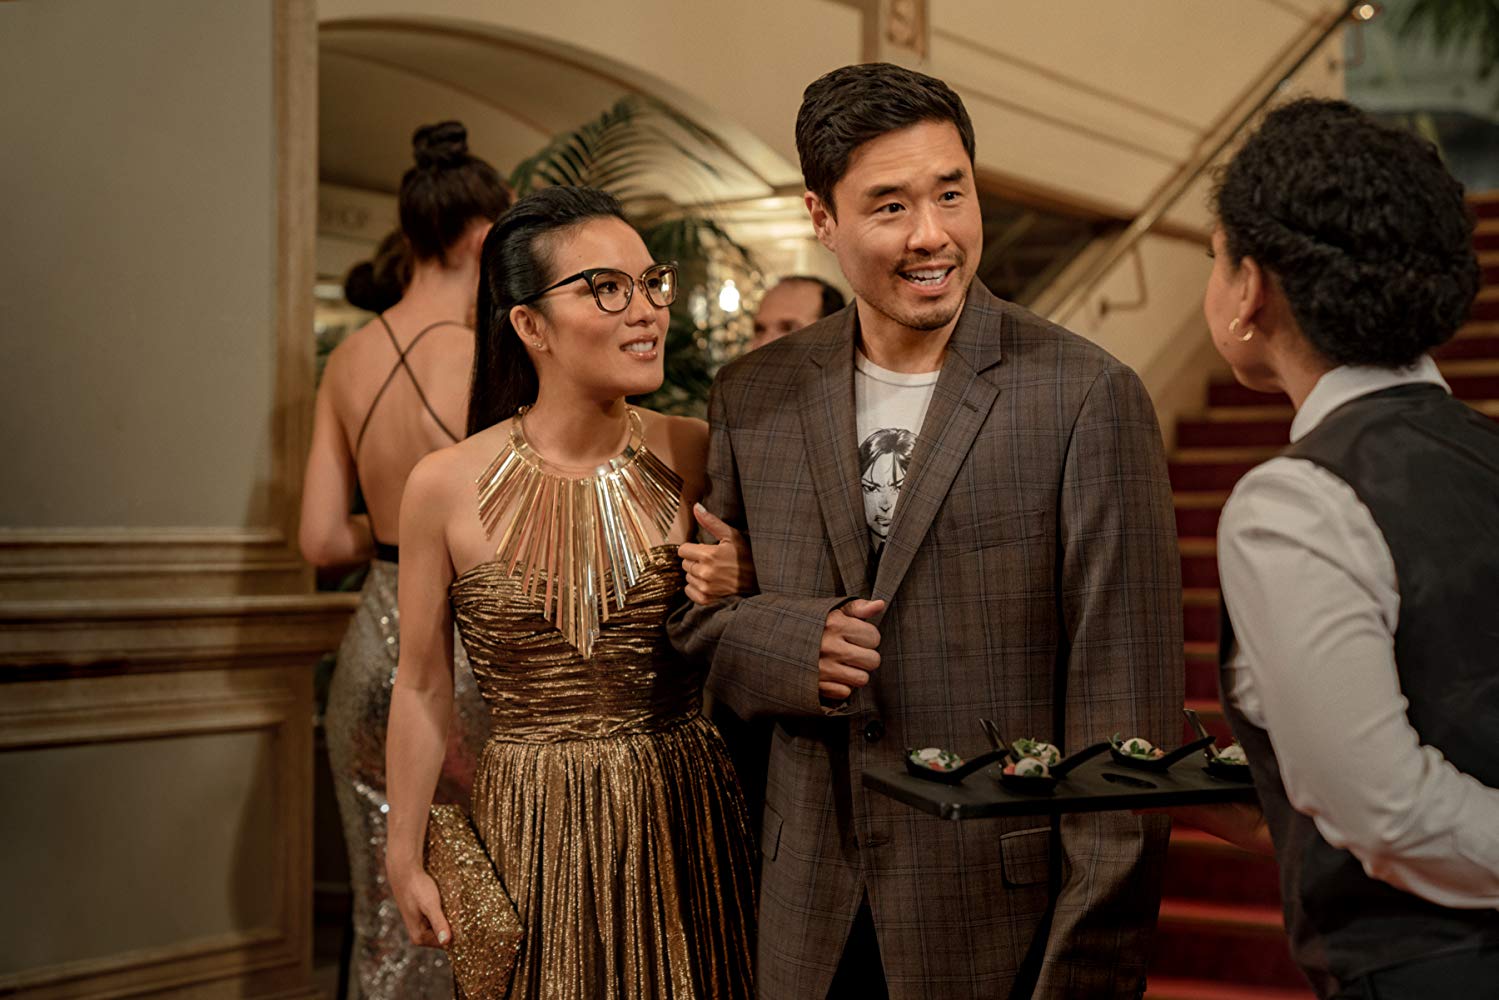 The Trailer For Netflix’s Always Be My Maybe With Ali Wong And Randall Park Has Dropped